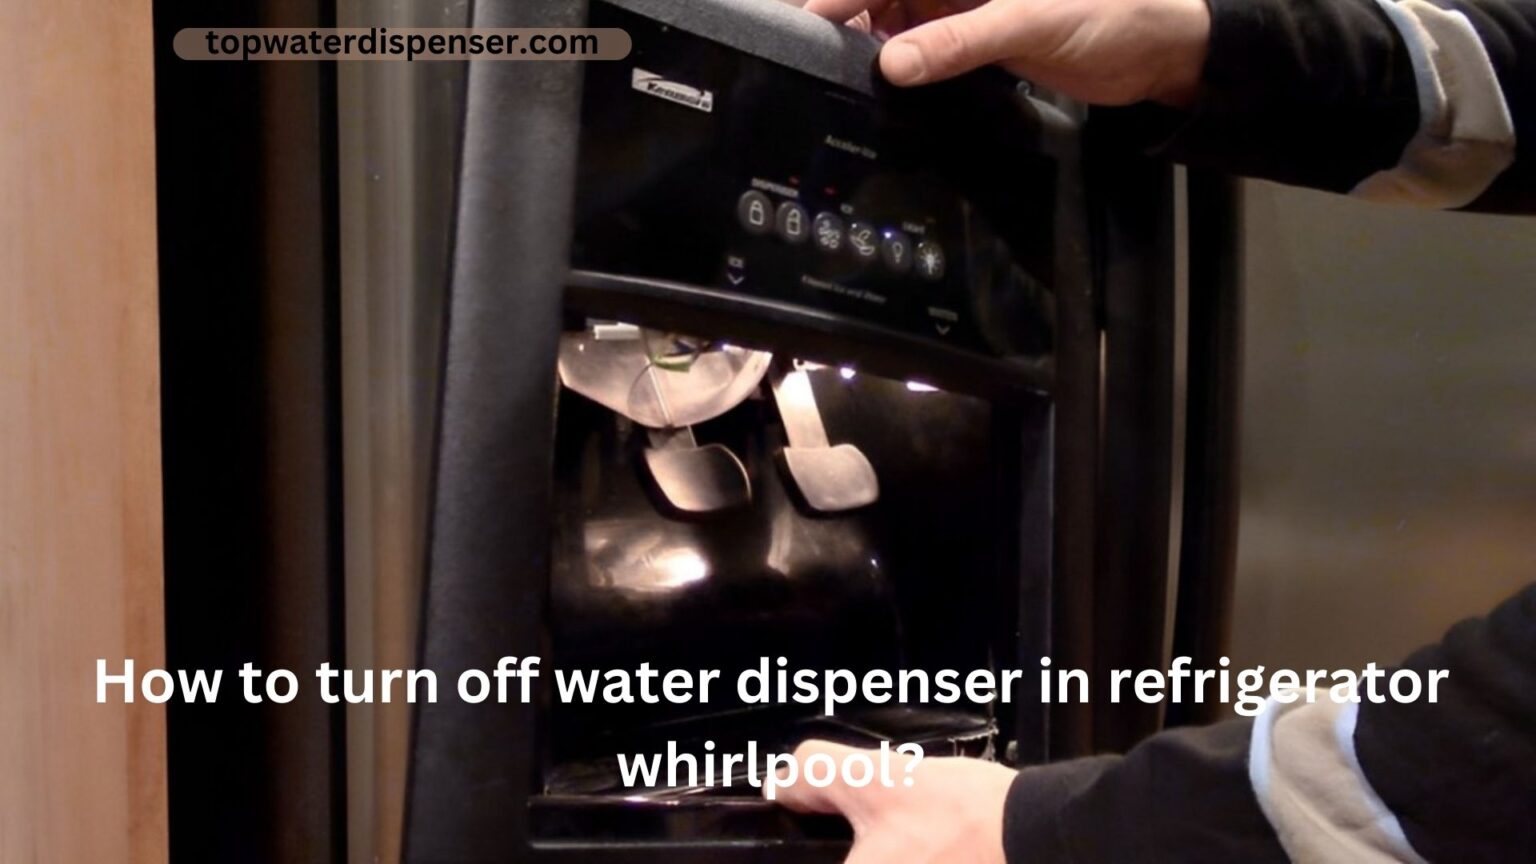 How to turn off water dispenser in refrigerator whirlpool?